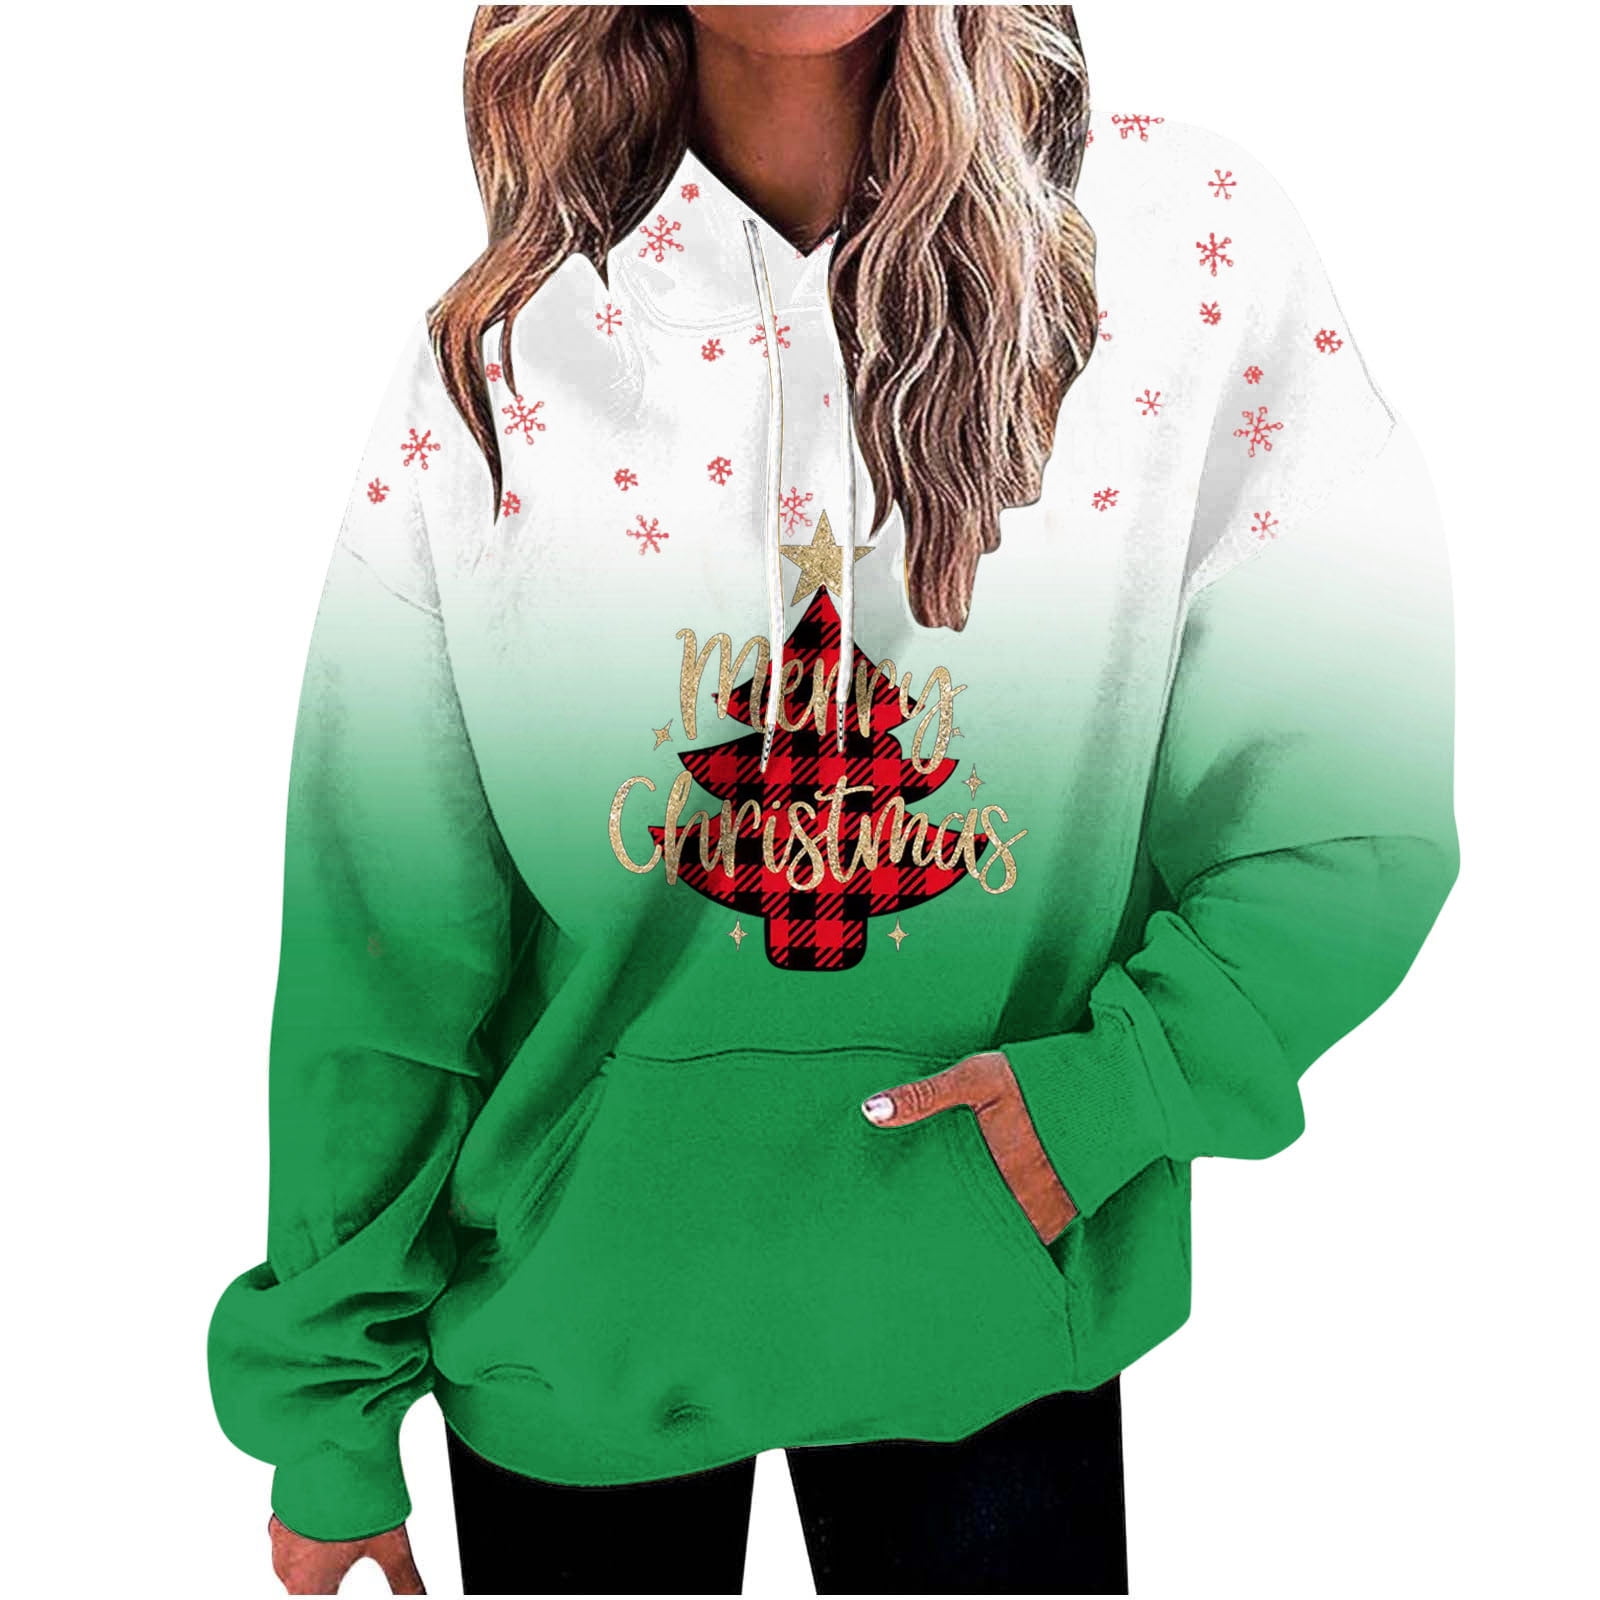 Jacenvly Womens Sweatshirts Graphic Clearance Long Sleeve